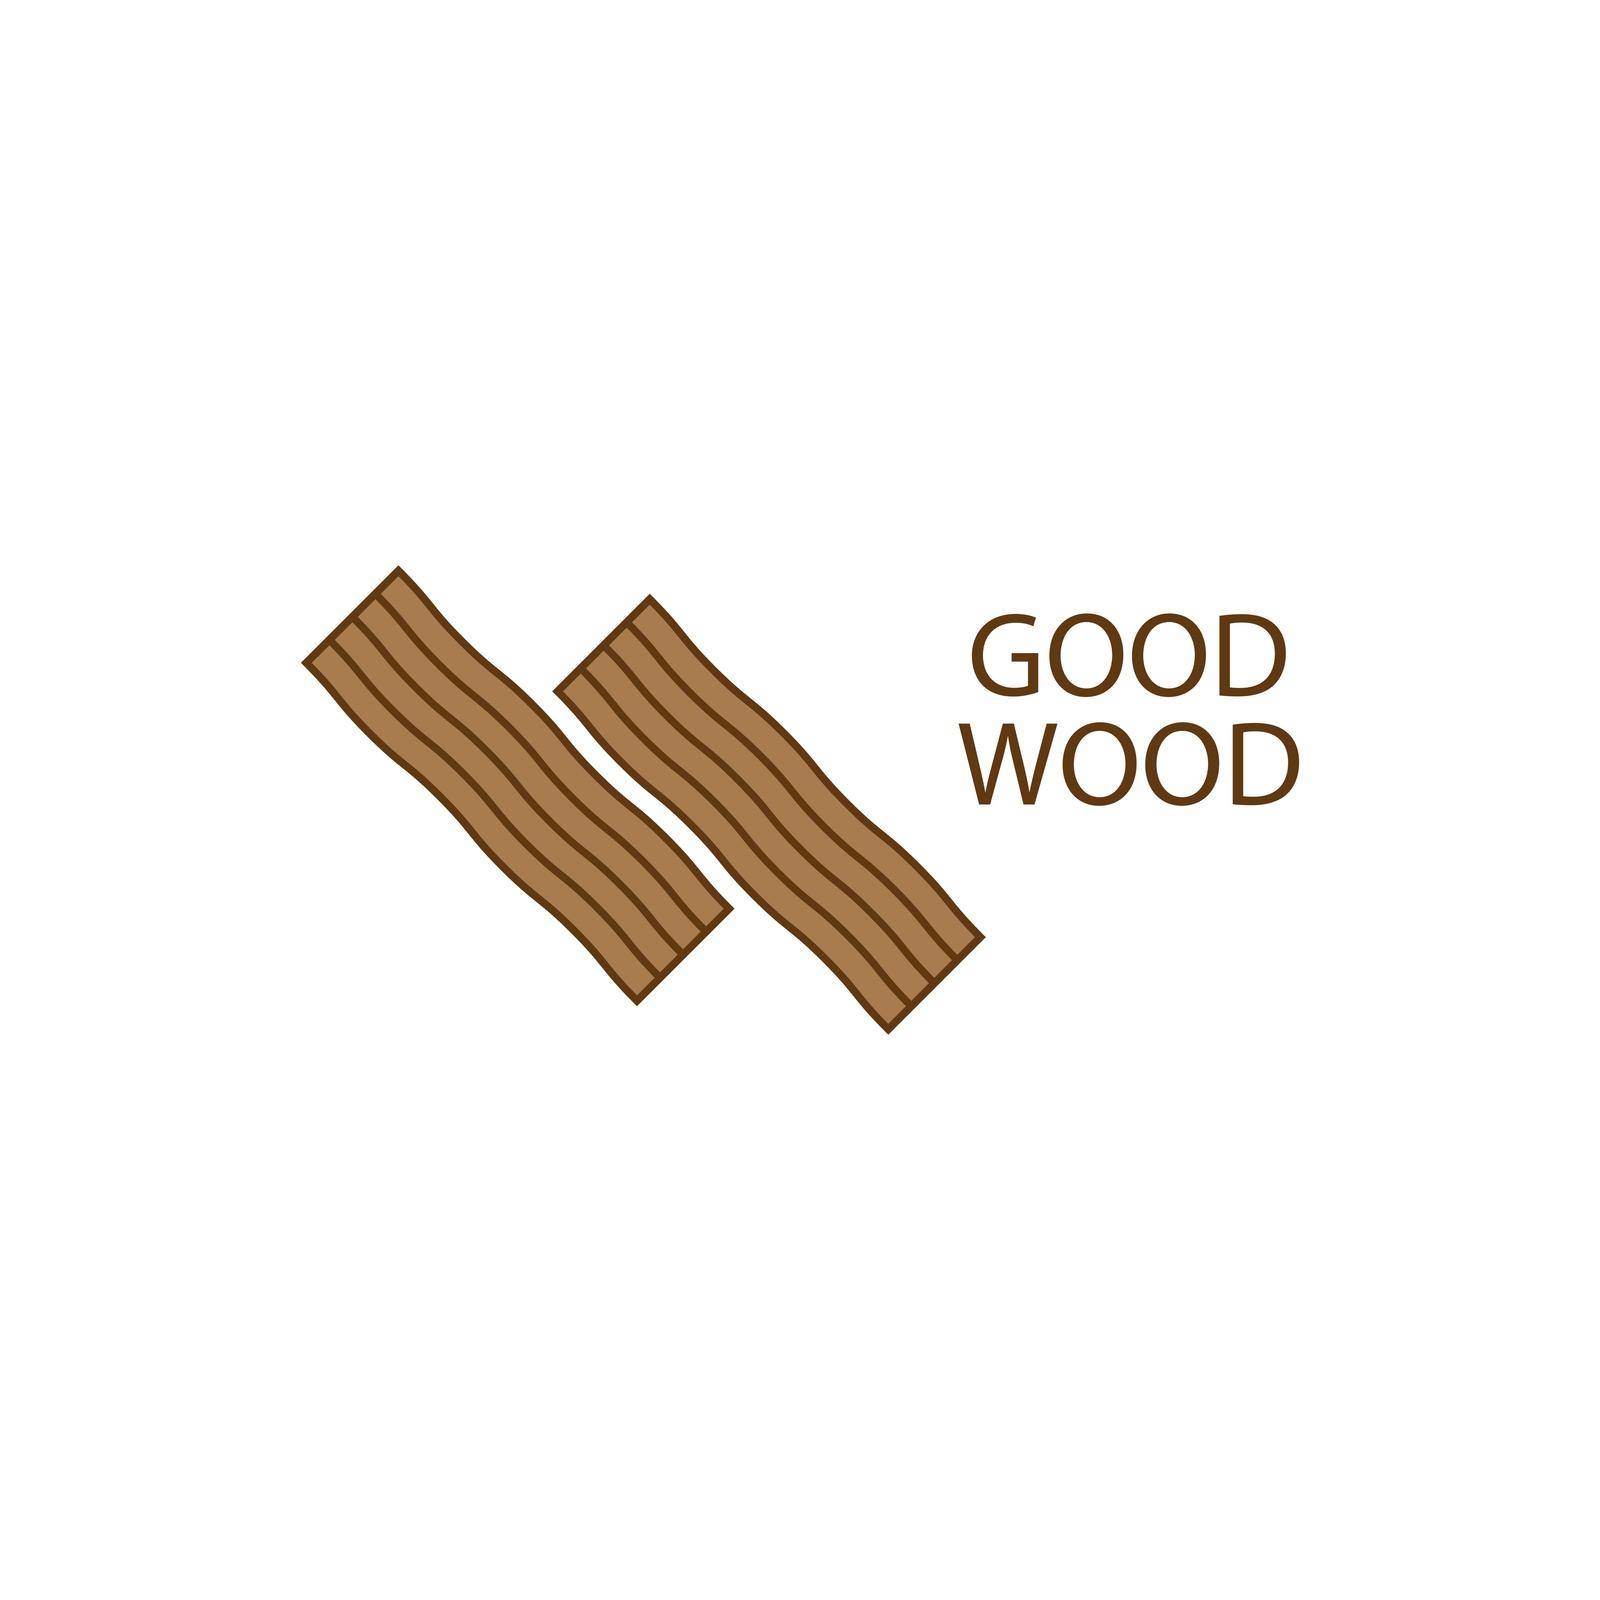 Wood by awk